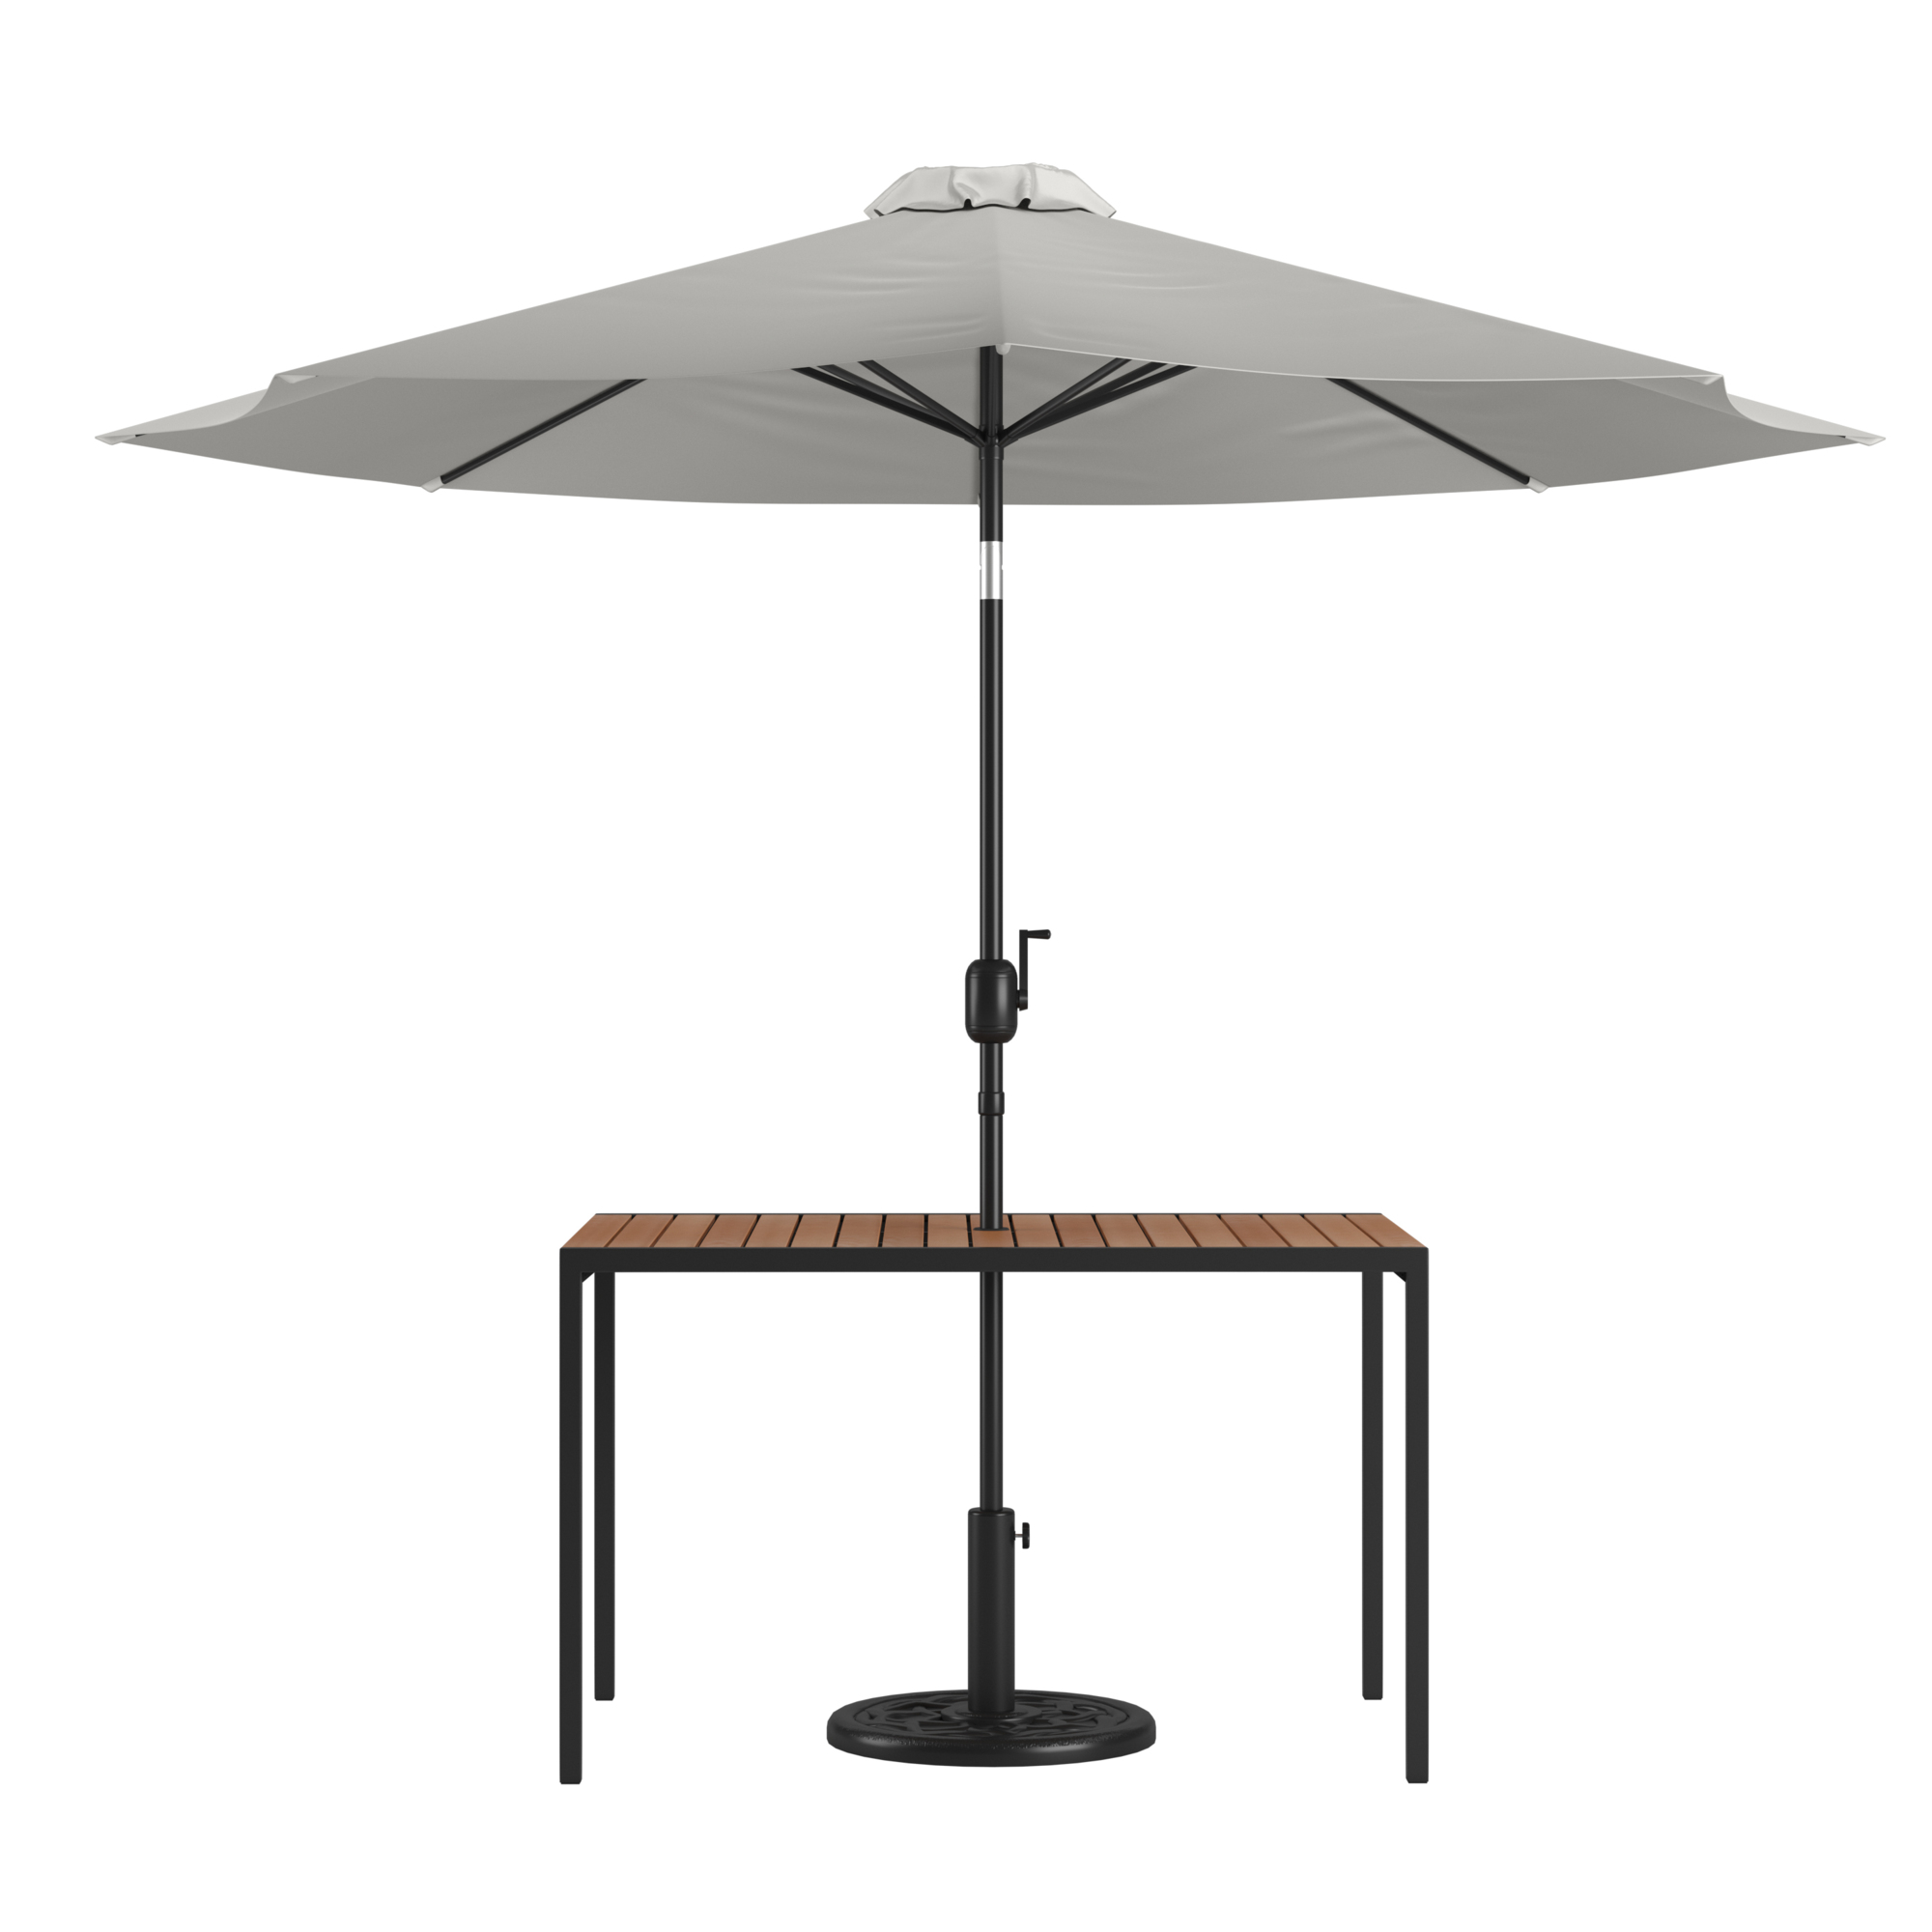 Flash Furniture, Faux Teak 30 x 48 Patio Table-Gray Umbrella Base, Table Shape Rectangle, Primary Color Gray, Height 29.5 in, Model XU3048UB19BGY